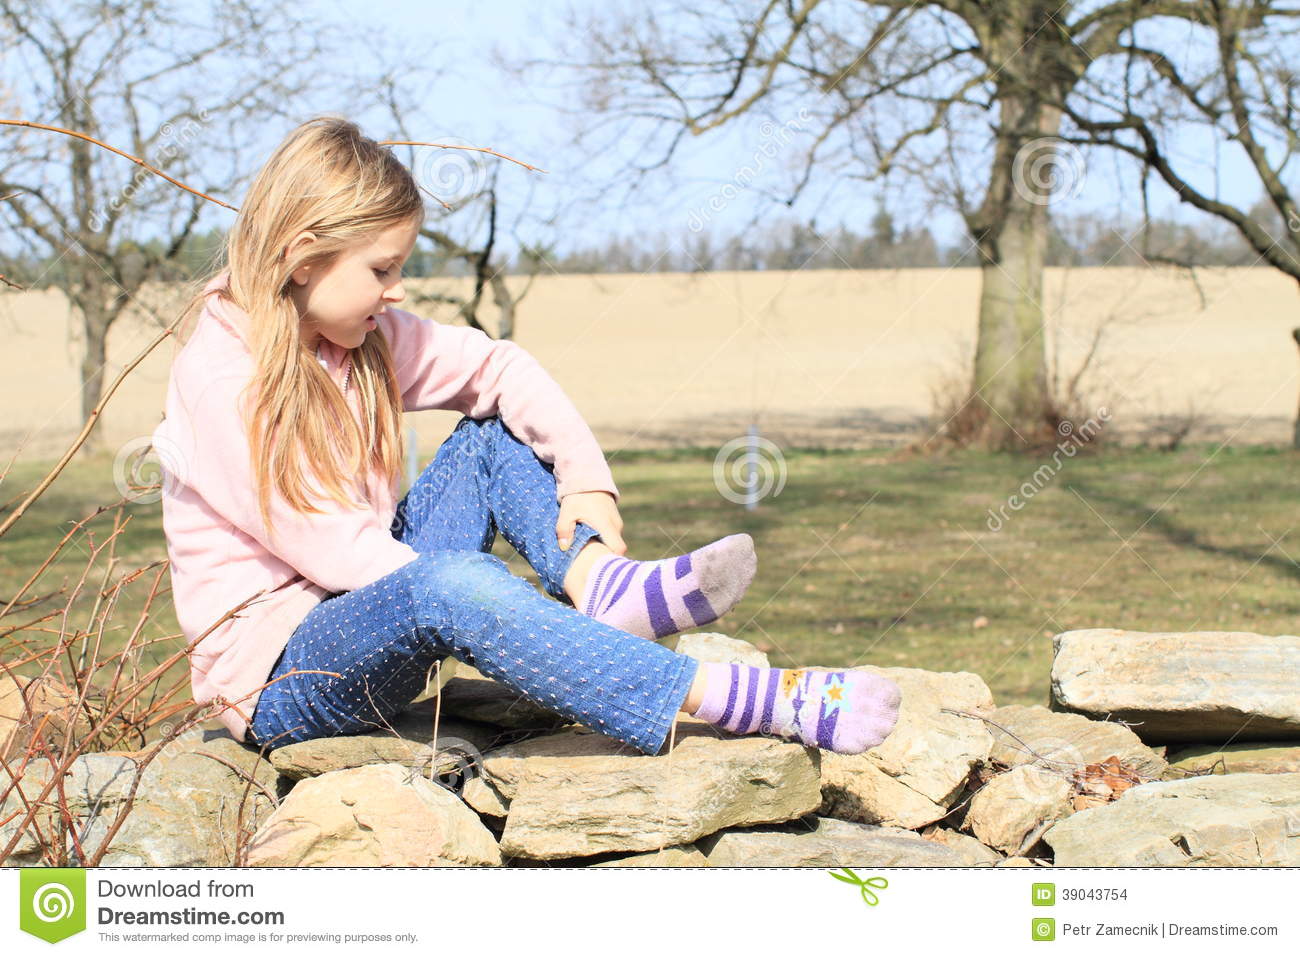 Pink Jacket Blue Pants Taking Off Socks While Sitting On Stone Wall